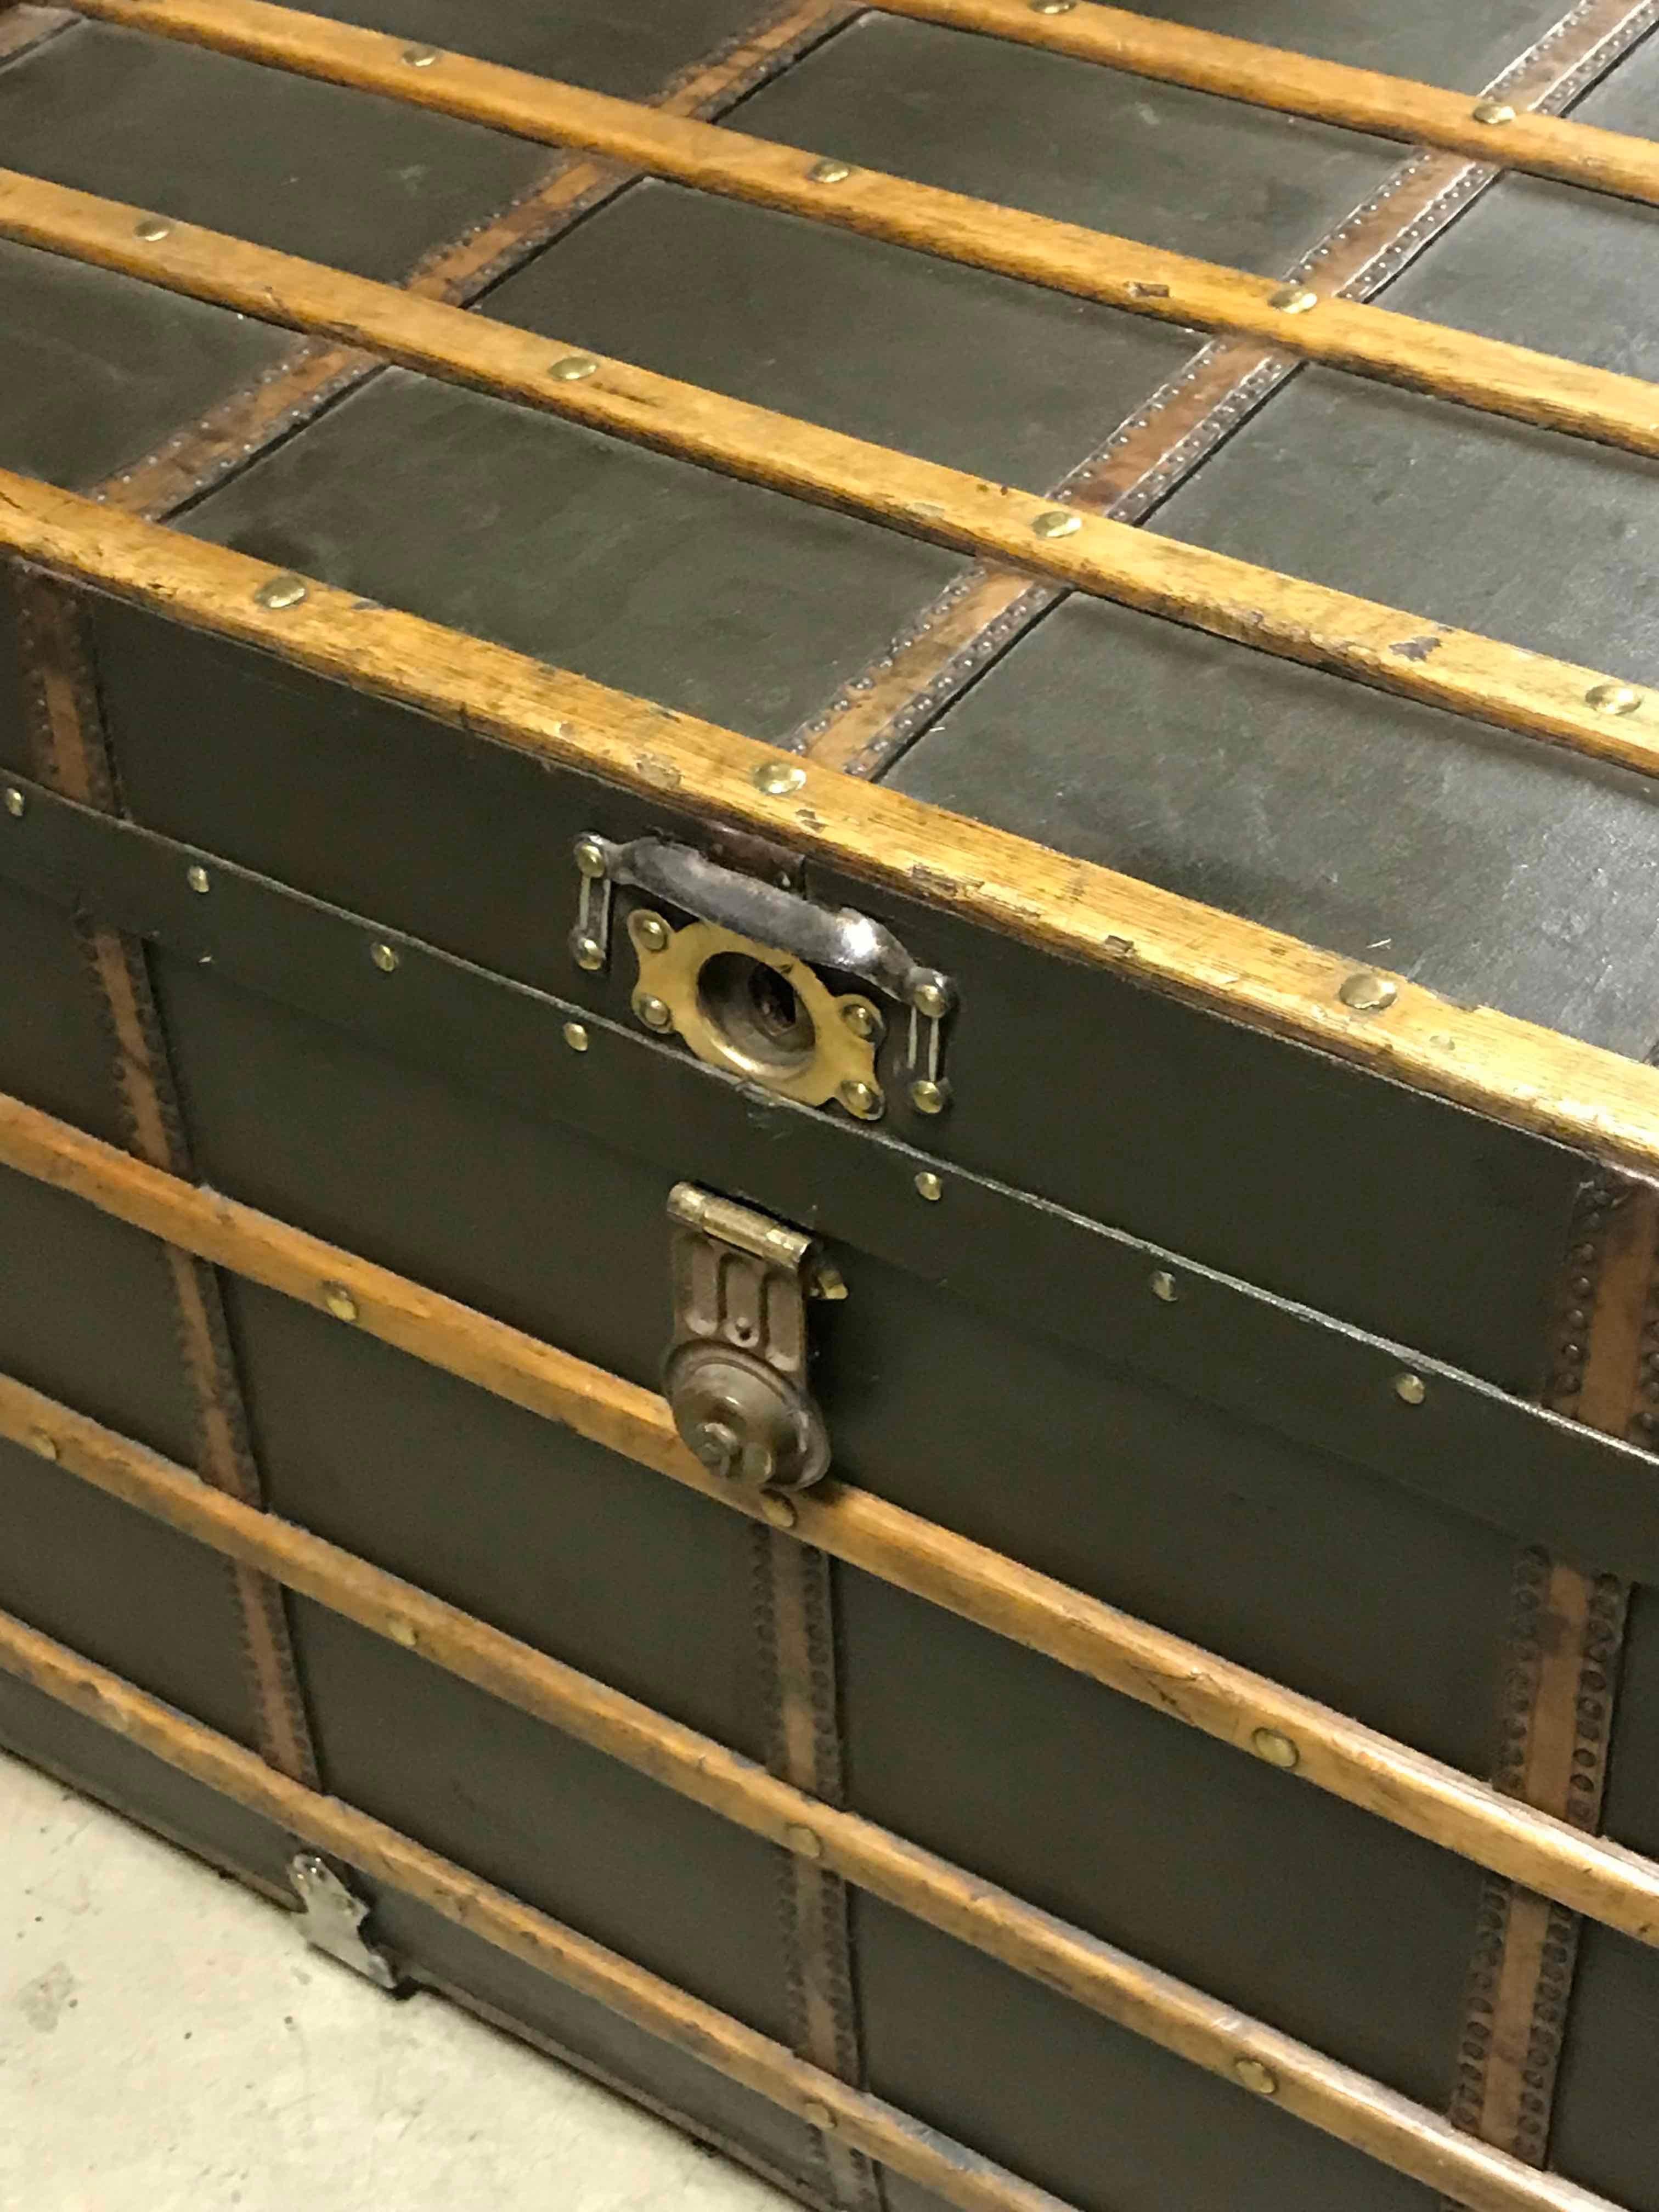 Late 19th-century English trunk or coffee table with wood detailing, metal hardware, and black leather. With green undertones. The piece has a remarkable aged patina and a handsome, sturdy appeal. This could still be used as travel storage, or as a